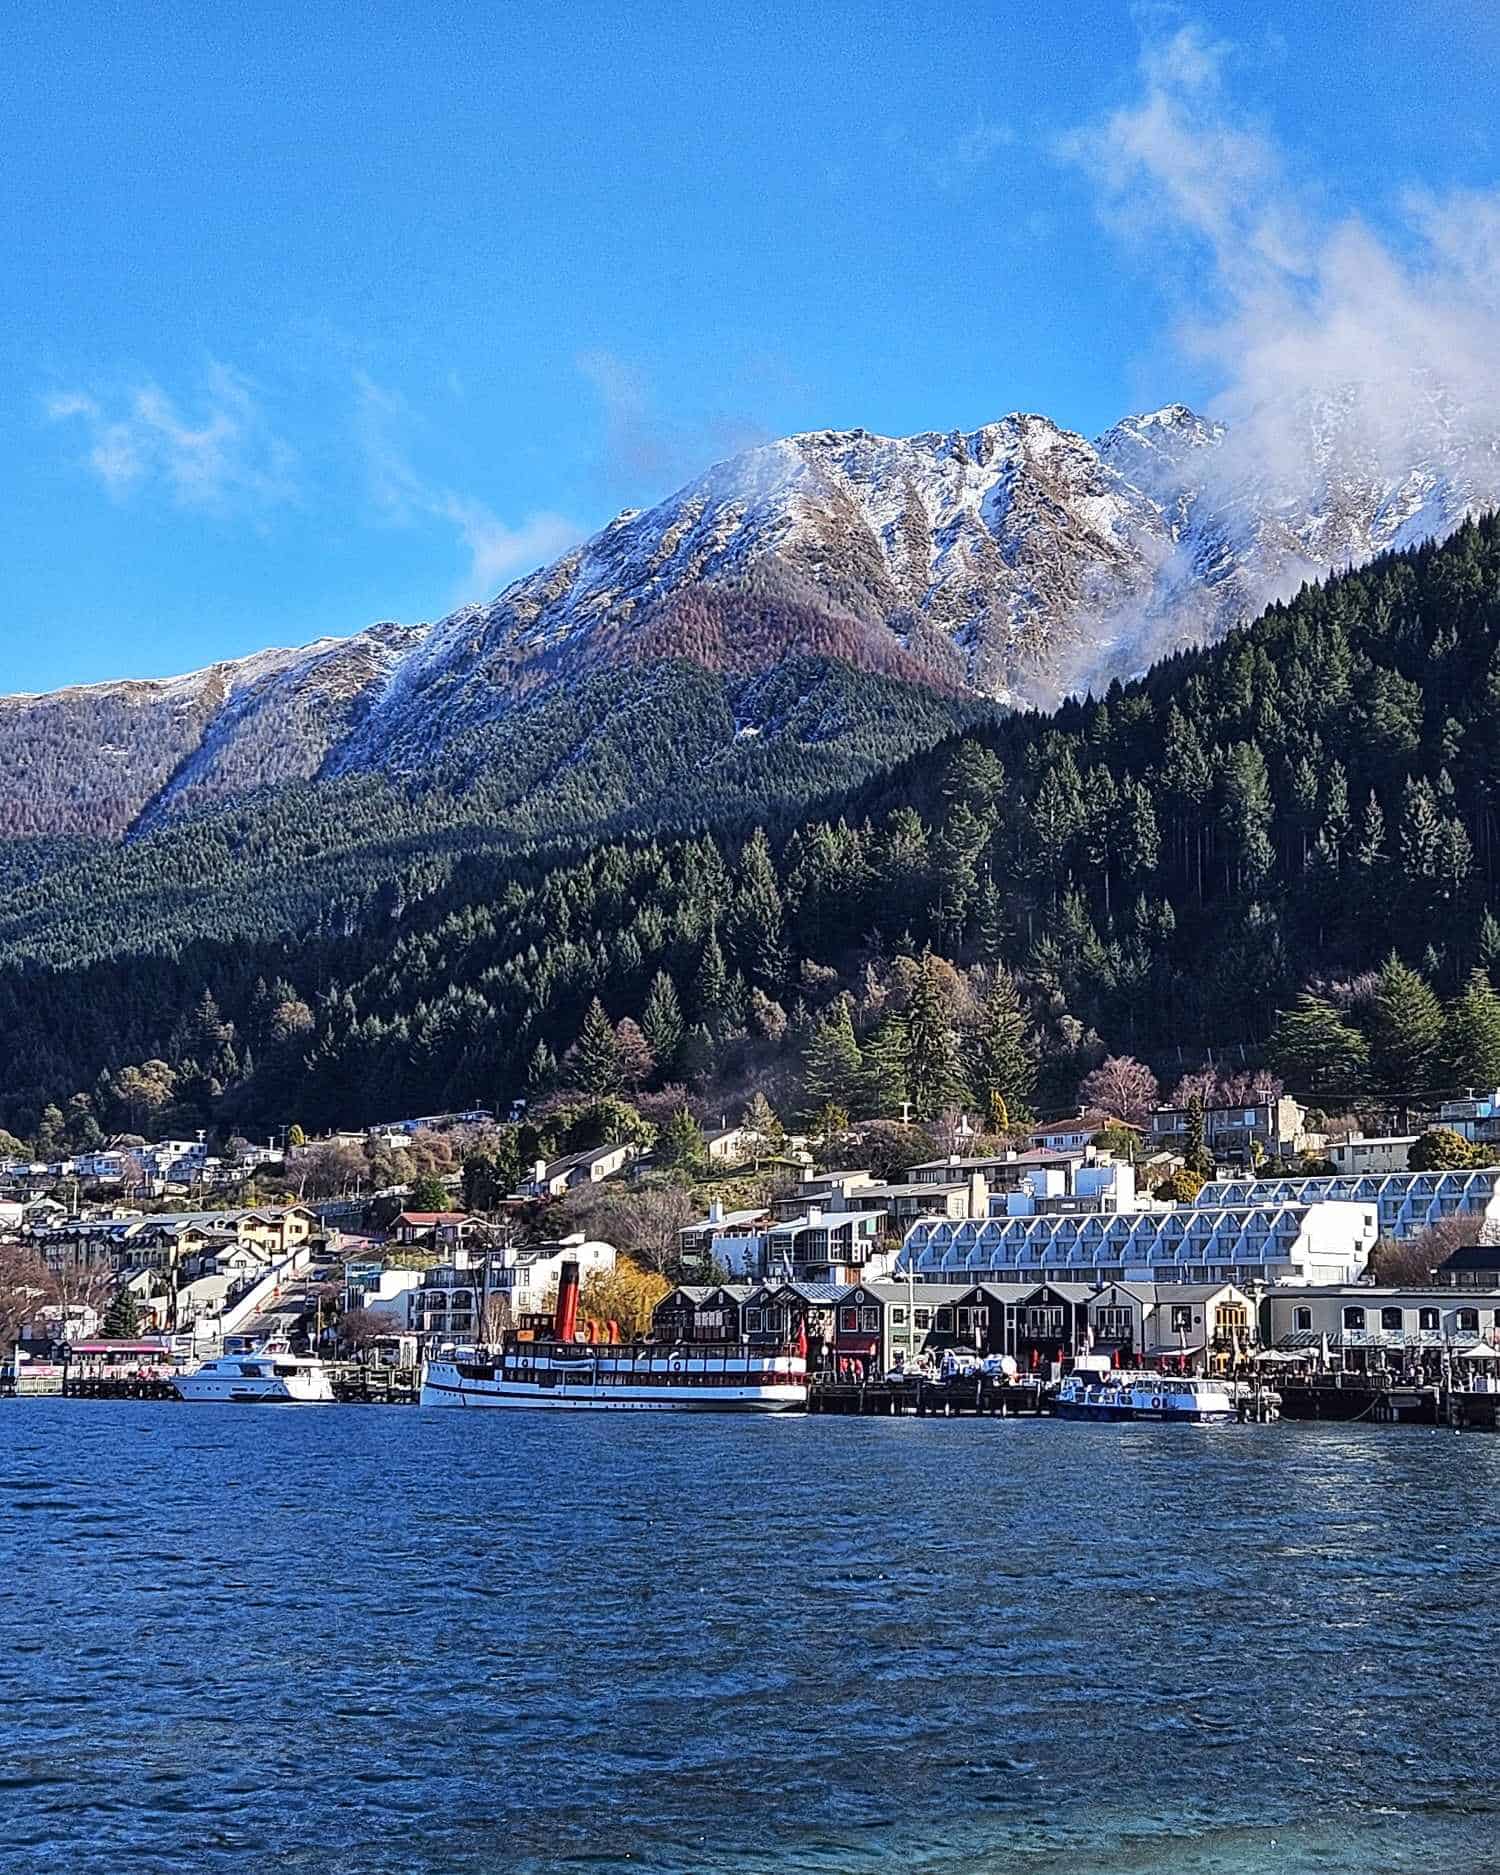 Best things to do in Queenstown New Zealand - Leanne McCabe - Queenstown waterfront